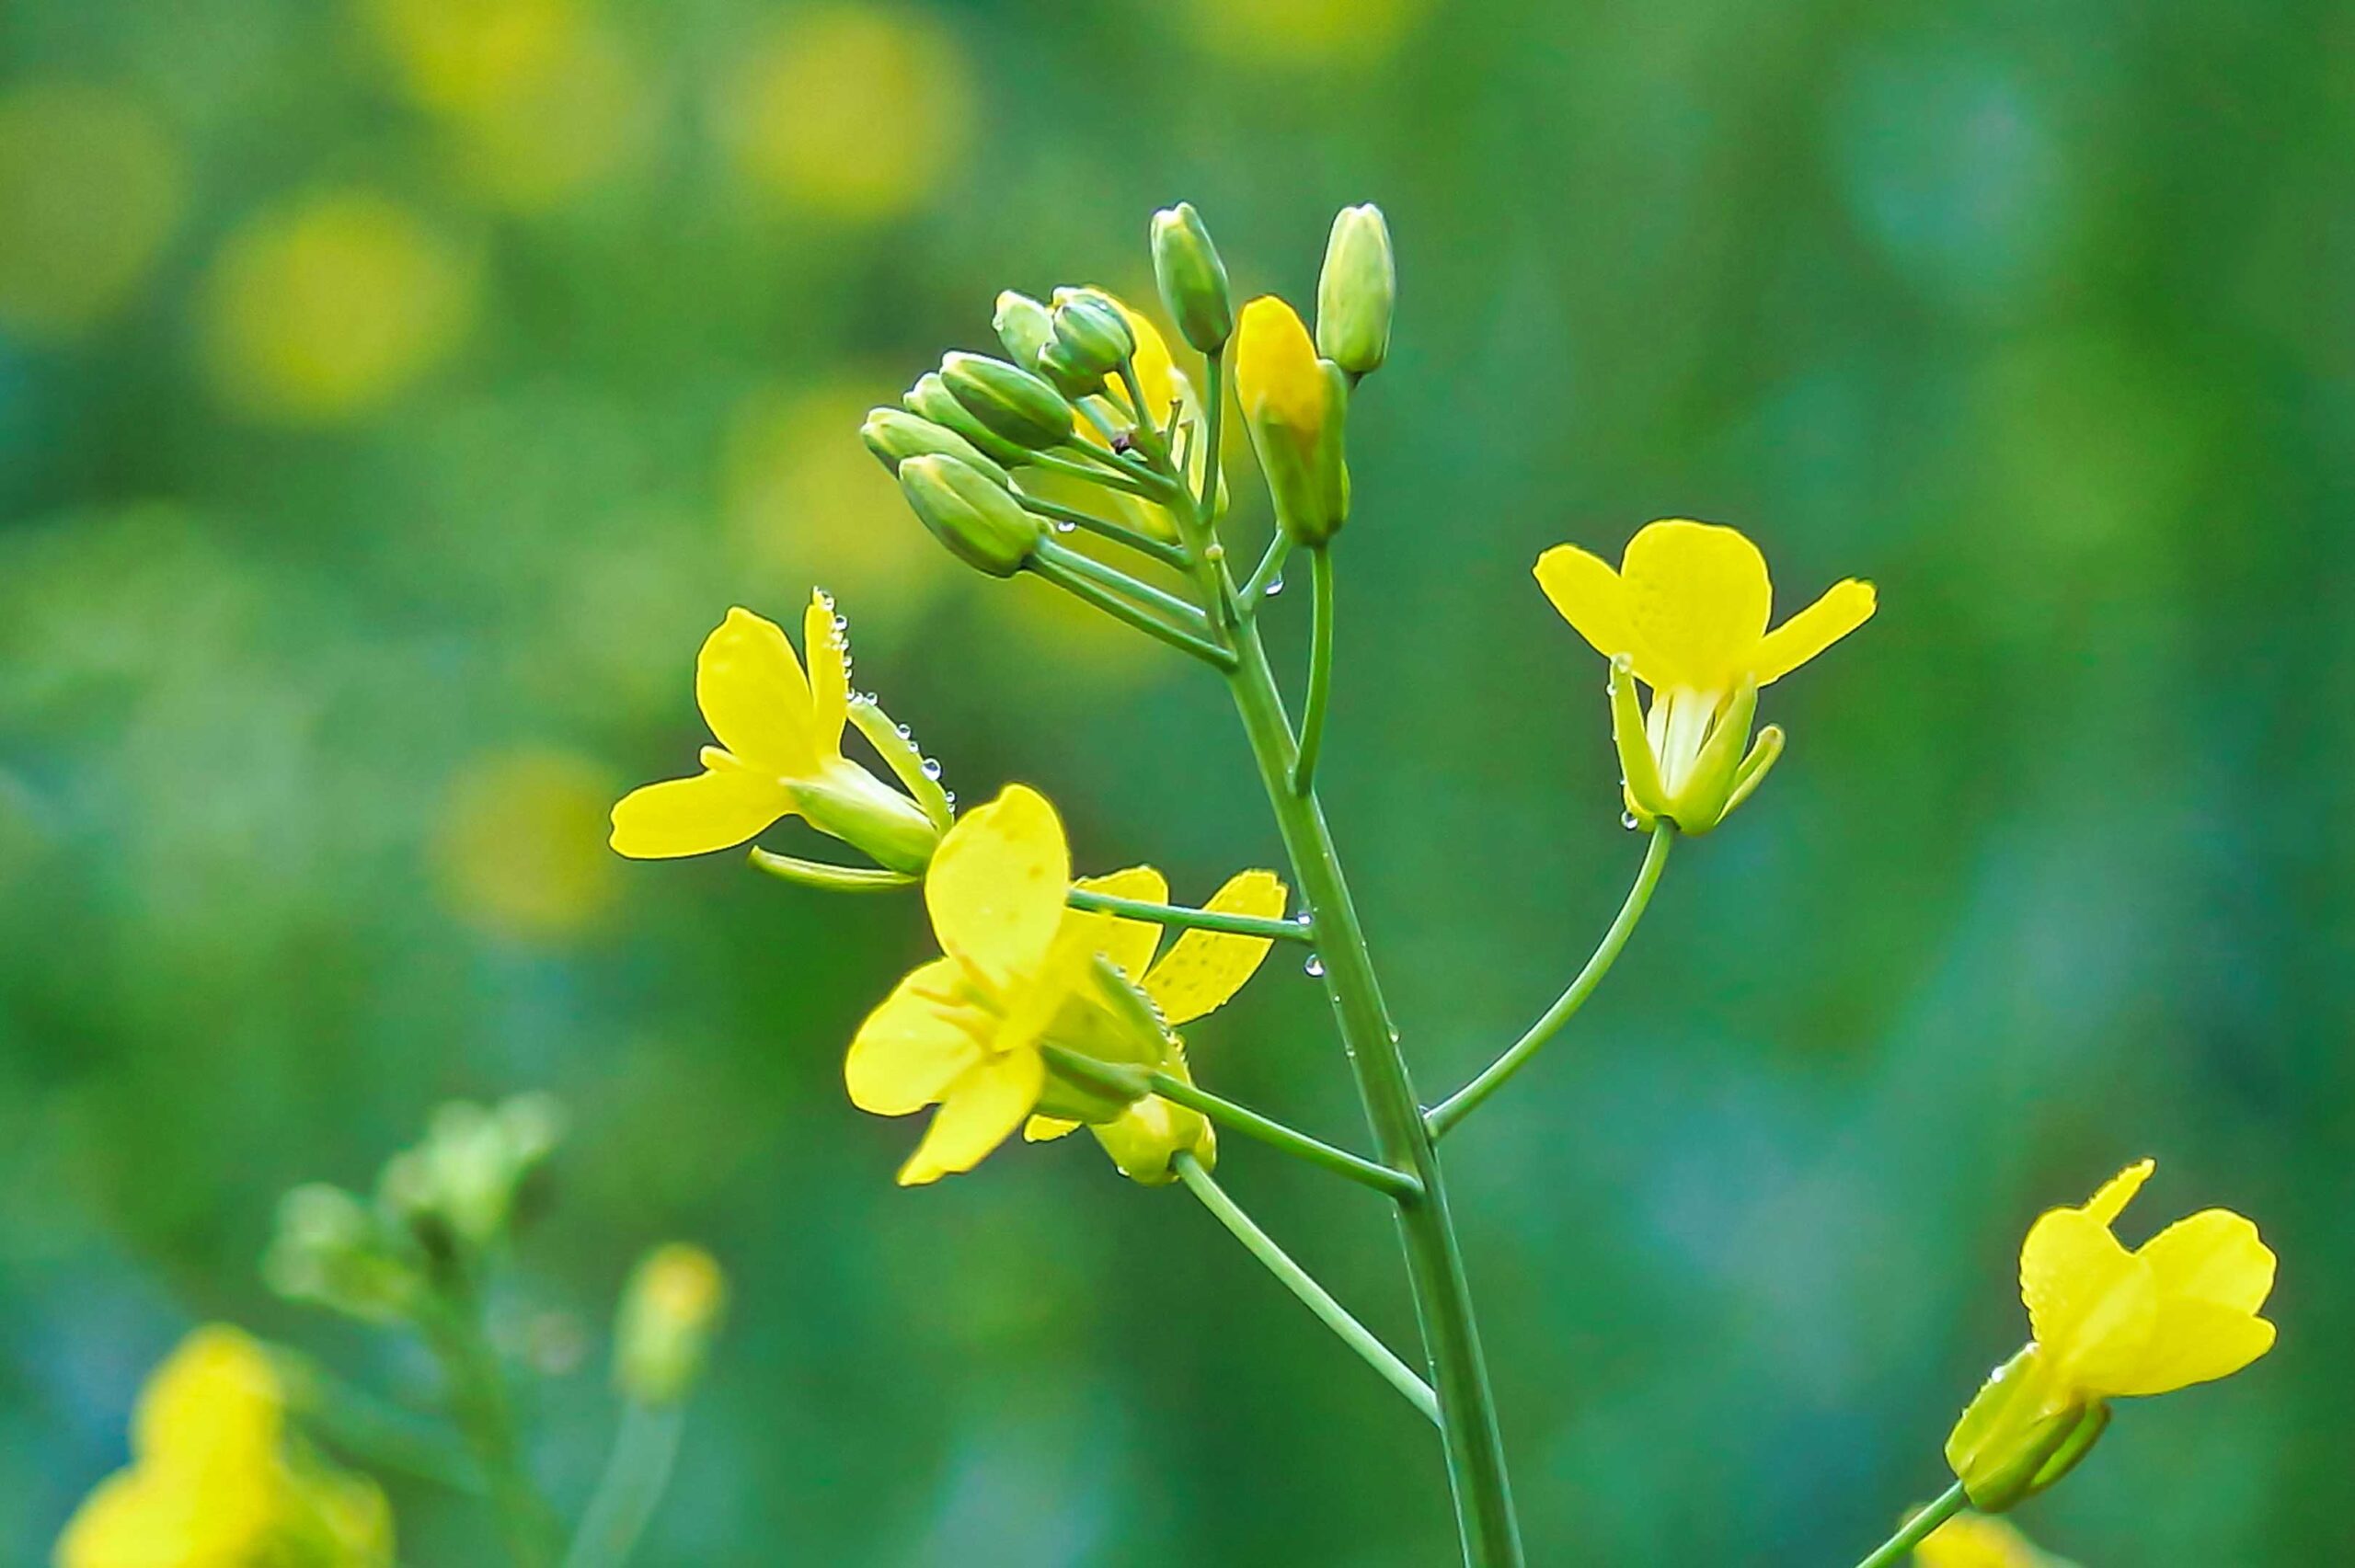 Close up of a High Euric Acid Rapeseed stalk with buds and blooms.